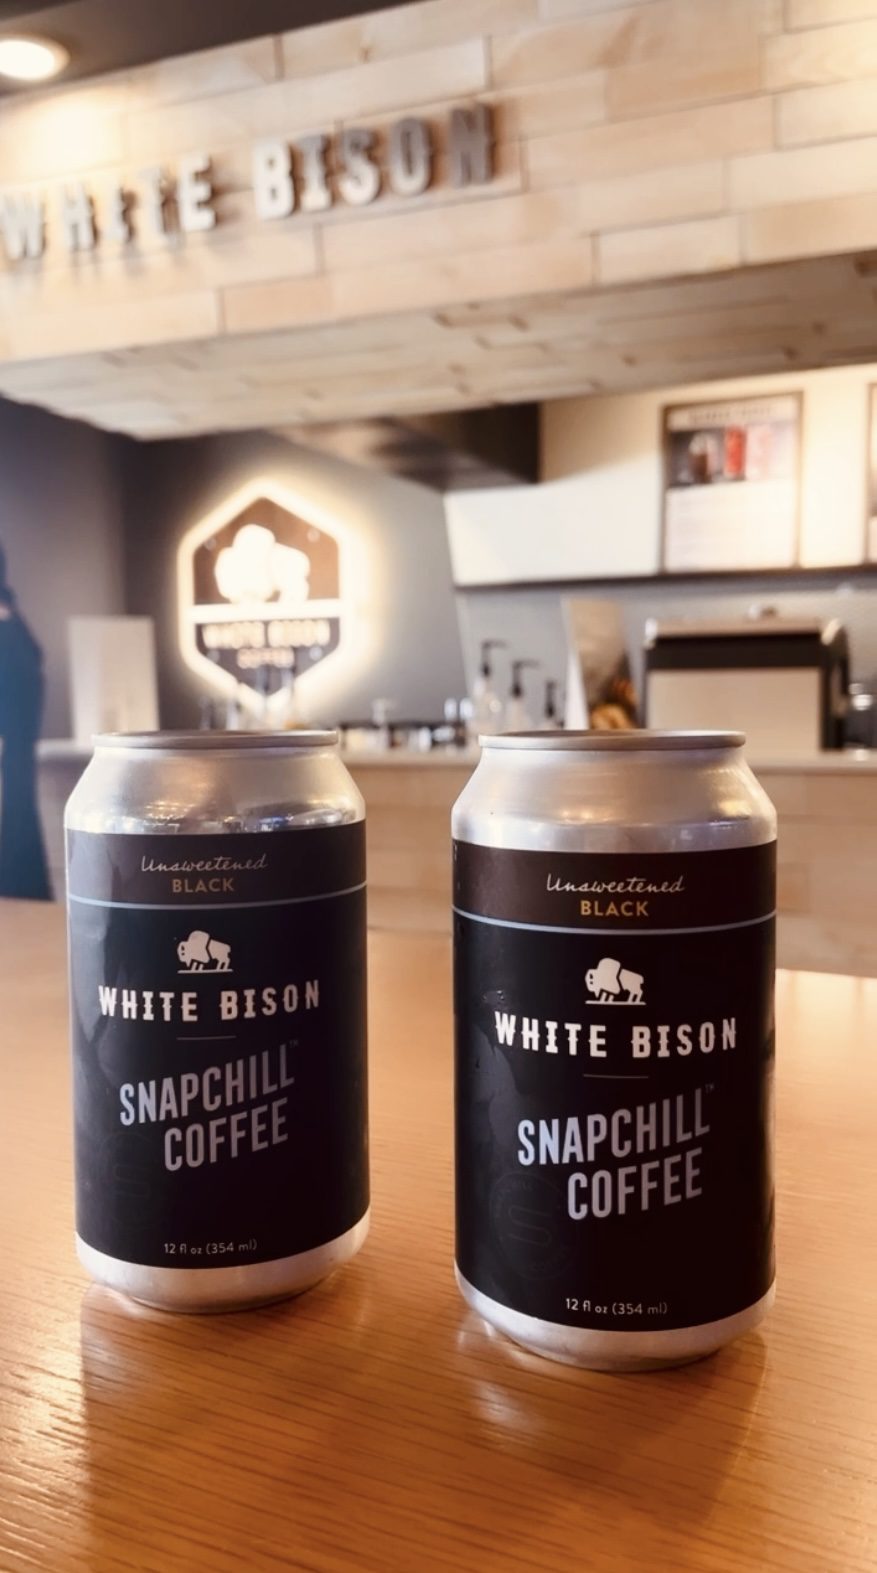 White Bison Coffee, Nashville-based brand embraces Snapchill™ technology to deliver a flavorful canned coffee.